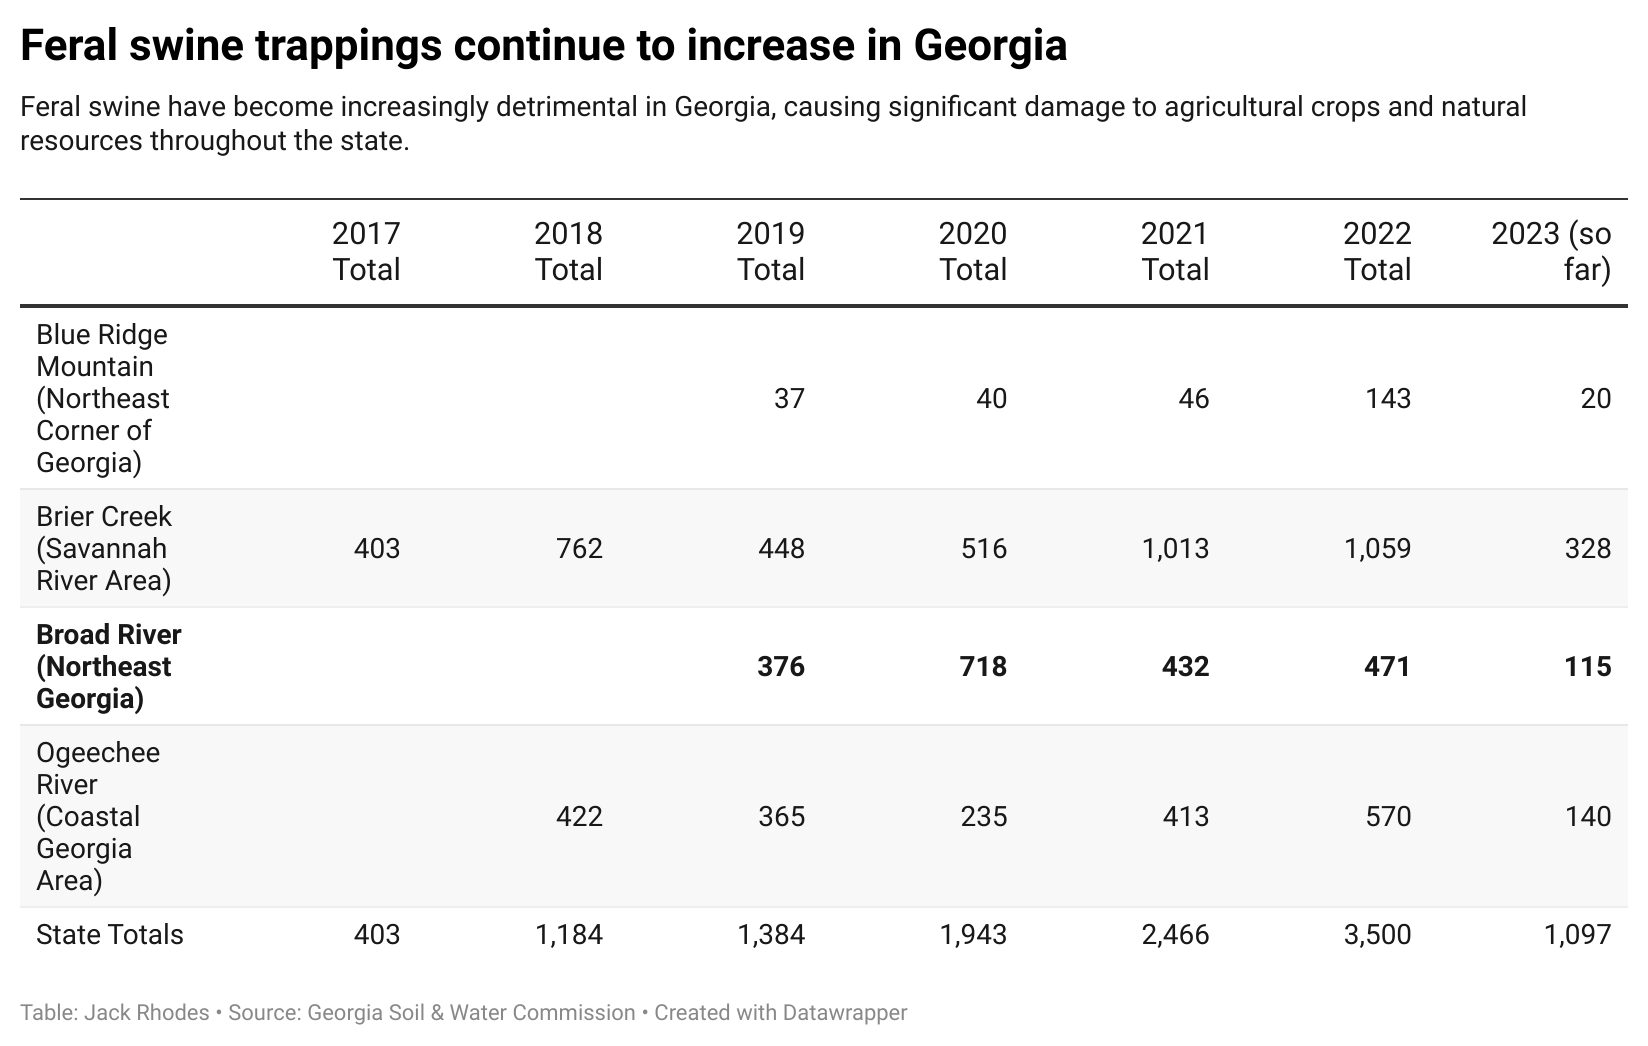 The data behind the growth in feral hogs in Georgia.